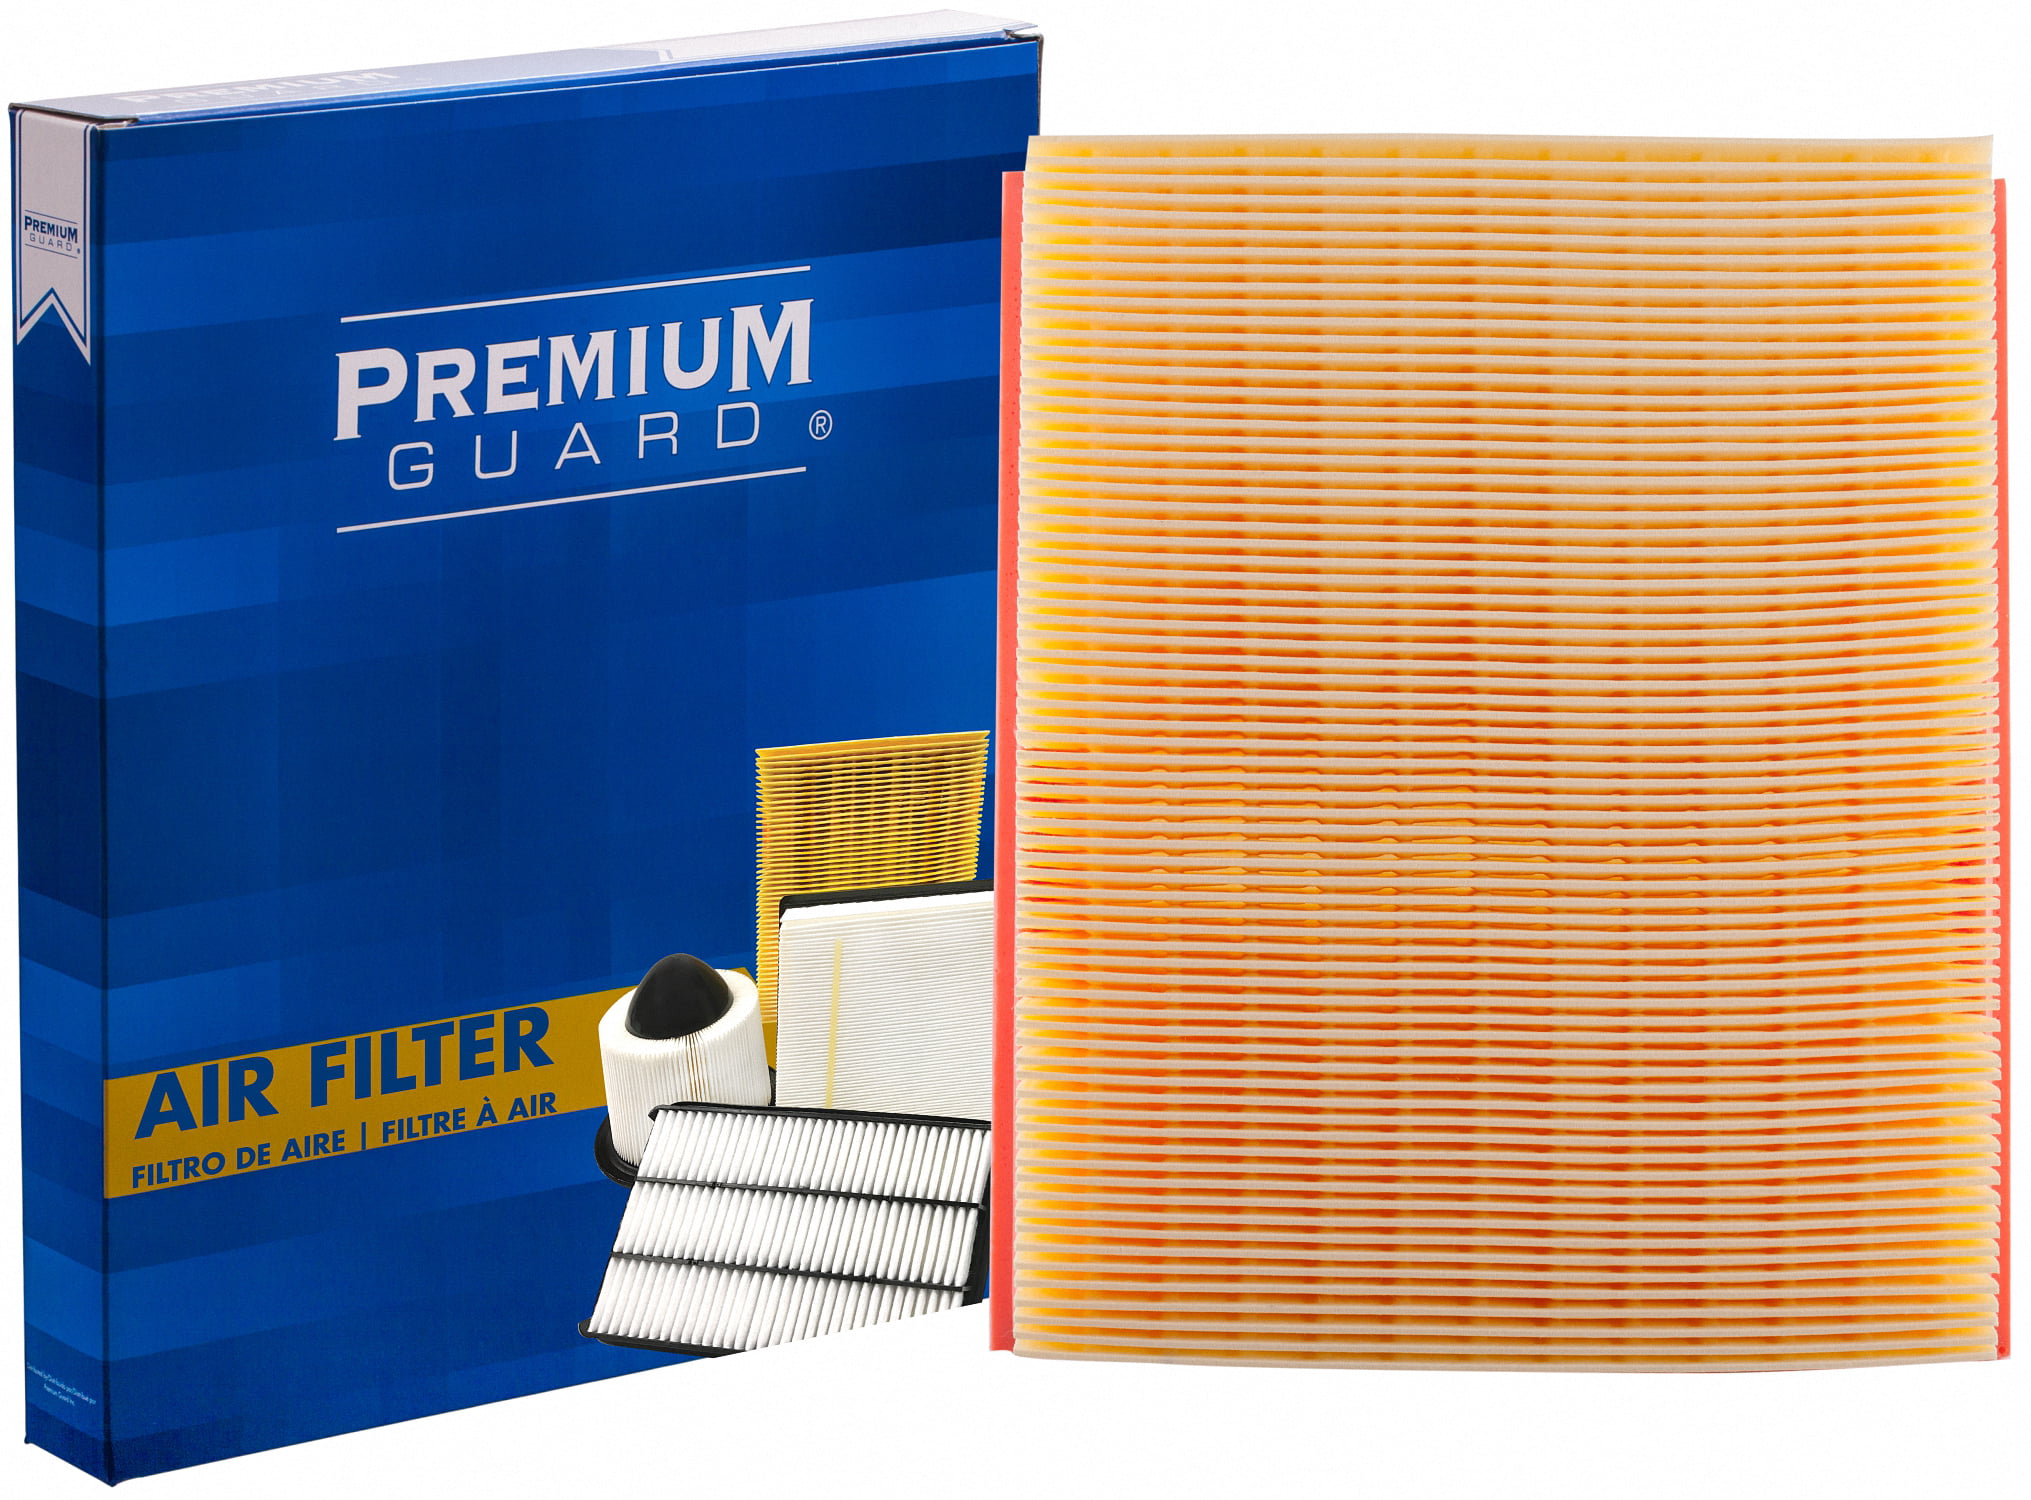 Freelander 2005-2002 Premium Guard Air Filter PA5381 Range Rover 2002-1995 Fits Land Rover Discovery 2004-1999 